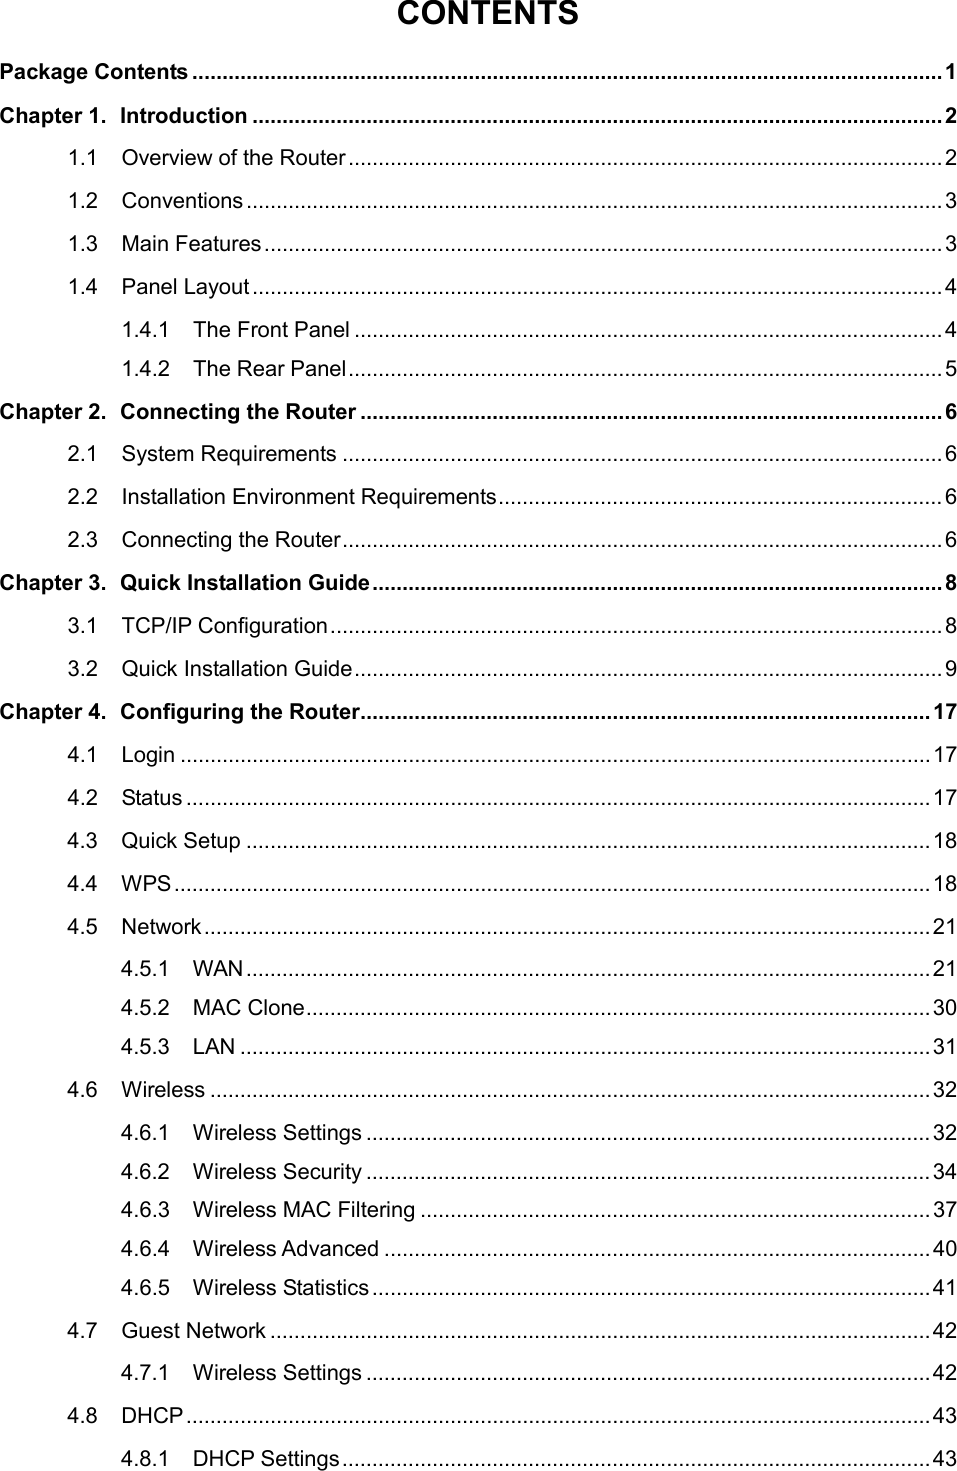  CONTENTS Package Contents ............................................................................................................................. 1 Chapter 1. Introduction ................................................................................................................... 2 1.1 Overview of the Router ................................................................................................... 2 1.2 Conventions .................................................................................................................... 3 1.3 Main Features ................................................................................................................. 3 1.4 Panel Layout ................................................................................................................... 4 1.4.1 The Front Panel .................................................................................................. 4 1.4.2 The Rear Panel ................................................................................................... 5 Chapter 2. Connecting the Router ................................................................................................. 6 2.1 System Requirements .................................................................................................... 6 2.2 Installation Environment Requirements .......................................................................... 6 2.3 Connecting the Router .................................................................................................... 6 Chapter 3. Quick Installation Guide ............................................................................................... 8 3.1 TCP/IP Configuration ...................................................................................................... 8 3.2 Quick Installation Guide .................................................................................................. 9 Chapter 4. Configuring the Router ............................................................................................... 17 4.1 Login ............................................................................................................................. 17 4.2 Status ............................................................................................................................ 17 4.3 Quick Setup .................................................................................................................. 18 4.4 WPS .............................................................................................................................. 18 4.5 Network ......................................................................................................................... 21 4.5.1 WAN .................................................................................................................. 21 4.5.2 MAC Clone ........................................................................................................ 30 4.5.3 LAN ................................................................................................................... 31 4.6 Wireless ........................................................................................................................ 32 4.6.1 Wireless Settings .............................................................................................. 32 4.6.2 Wireless Security .............................................................................................. 34 4.6.3 Wireless MAC Filtering ..................................................................................... 37 4.6.4 Wireless Advanced ........................................................................................... 40 4.6.5 Wireless Statistics ............................................................................................. 41 4.7 Guest Network .............................................................................................................. 42 4.7.1 Wireless Settings .............................................................................................. 42 4.8 DHCP ............................................................................................................................ 43 4.8.1 DHCP Settings .................................................................................................. 43  